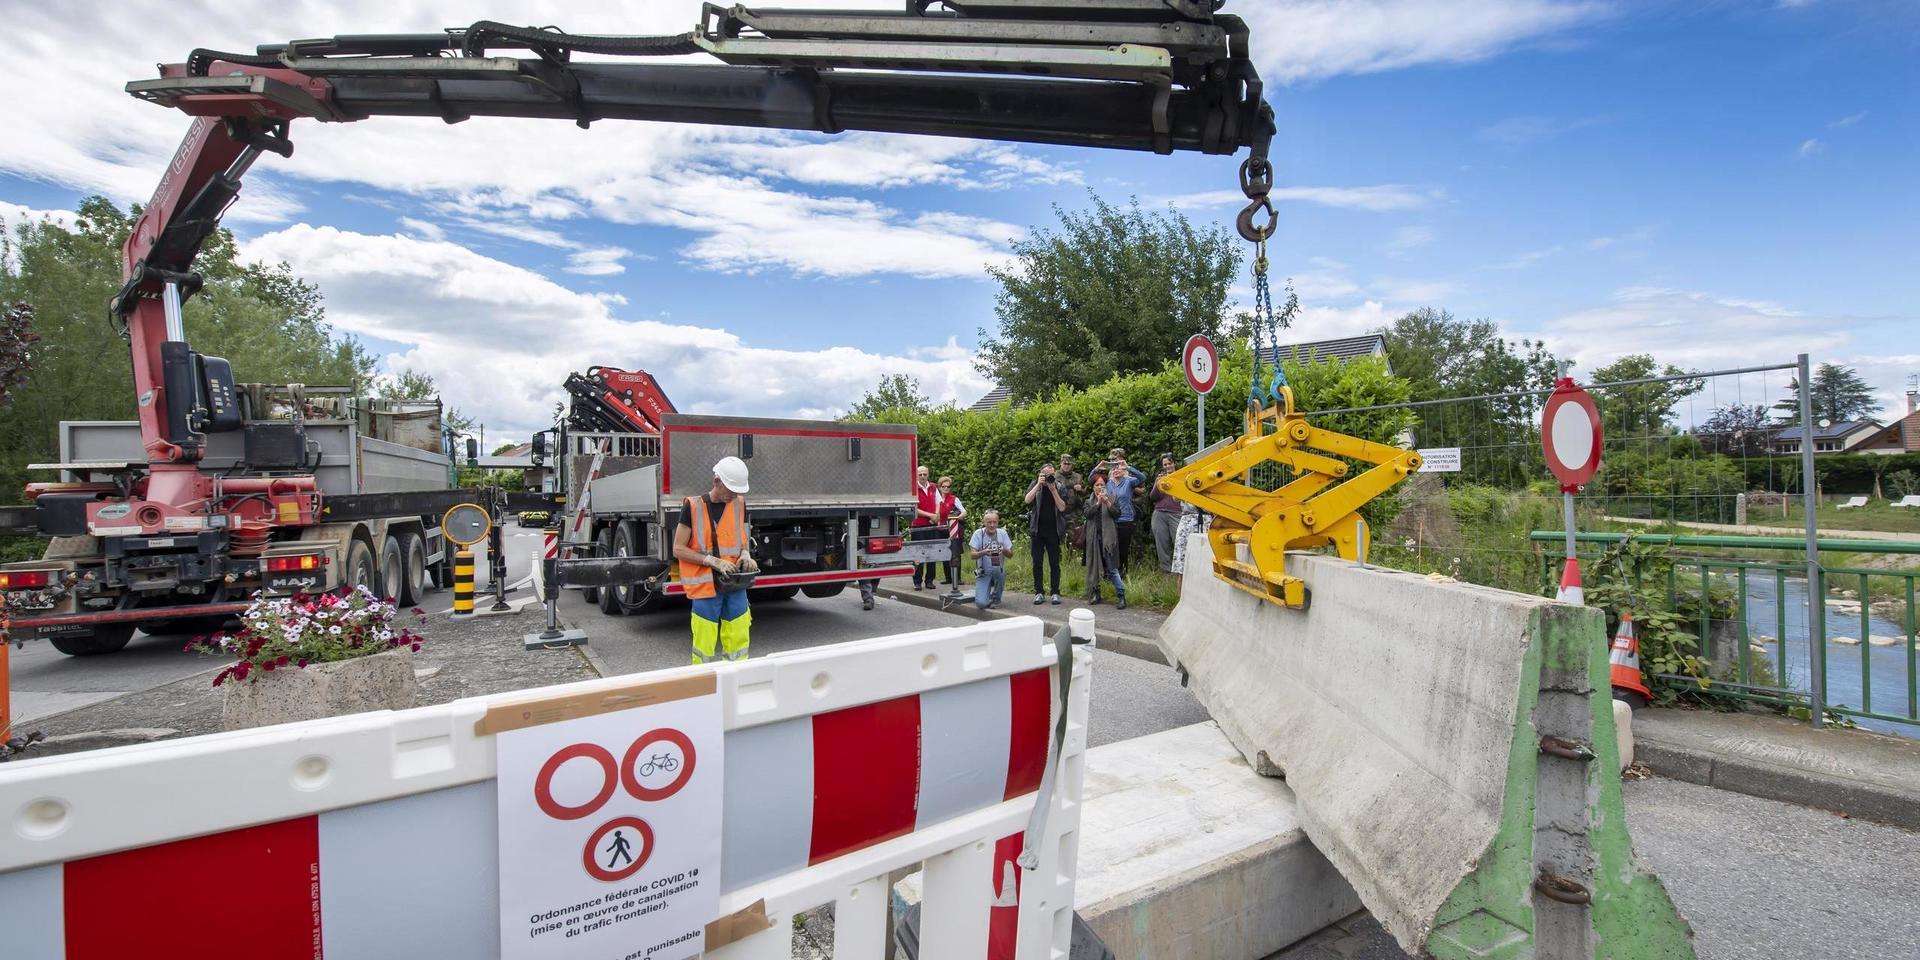 A company employee removes the concrete blocks that closed customs access, in Thonex near Geneva, Switzerland, on Sunday, June 14, 2020. Concrete blocks closed the road at the Swiss-French border during the state of emergency due to the coronavirus COVID-19. Switzerland will open its borders to the EU and EFTA countries and to the United Kingdom on Monday. June 15. Border controls within the Schengen area are abolished and shopping tourism is allowed again. (Martial Trezzini/Keystone via AP)  DMME140